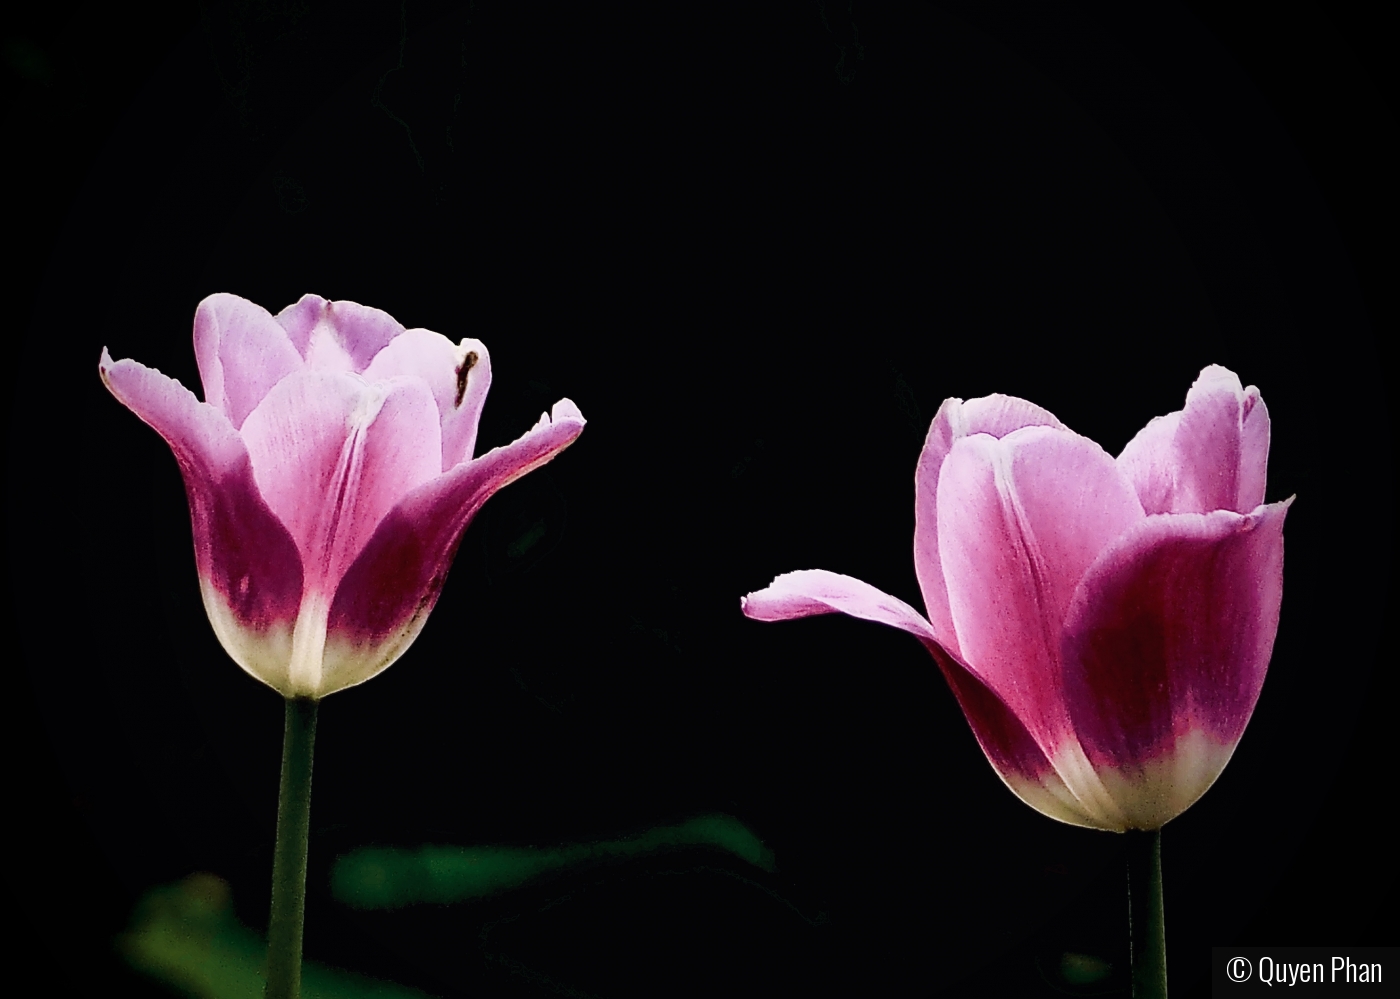 Two Tulips by Quyen Phan